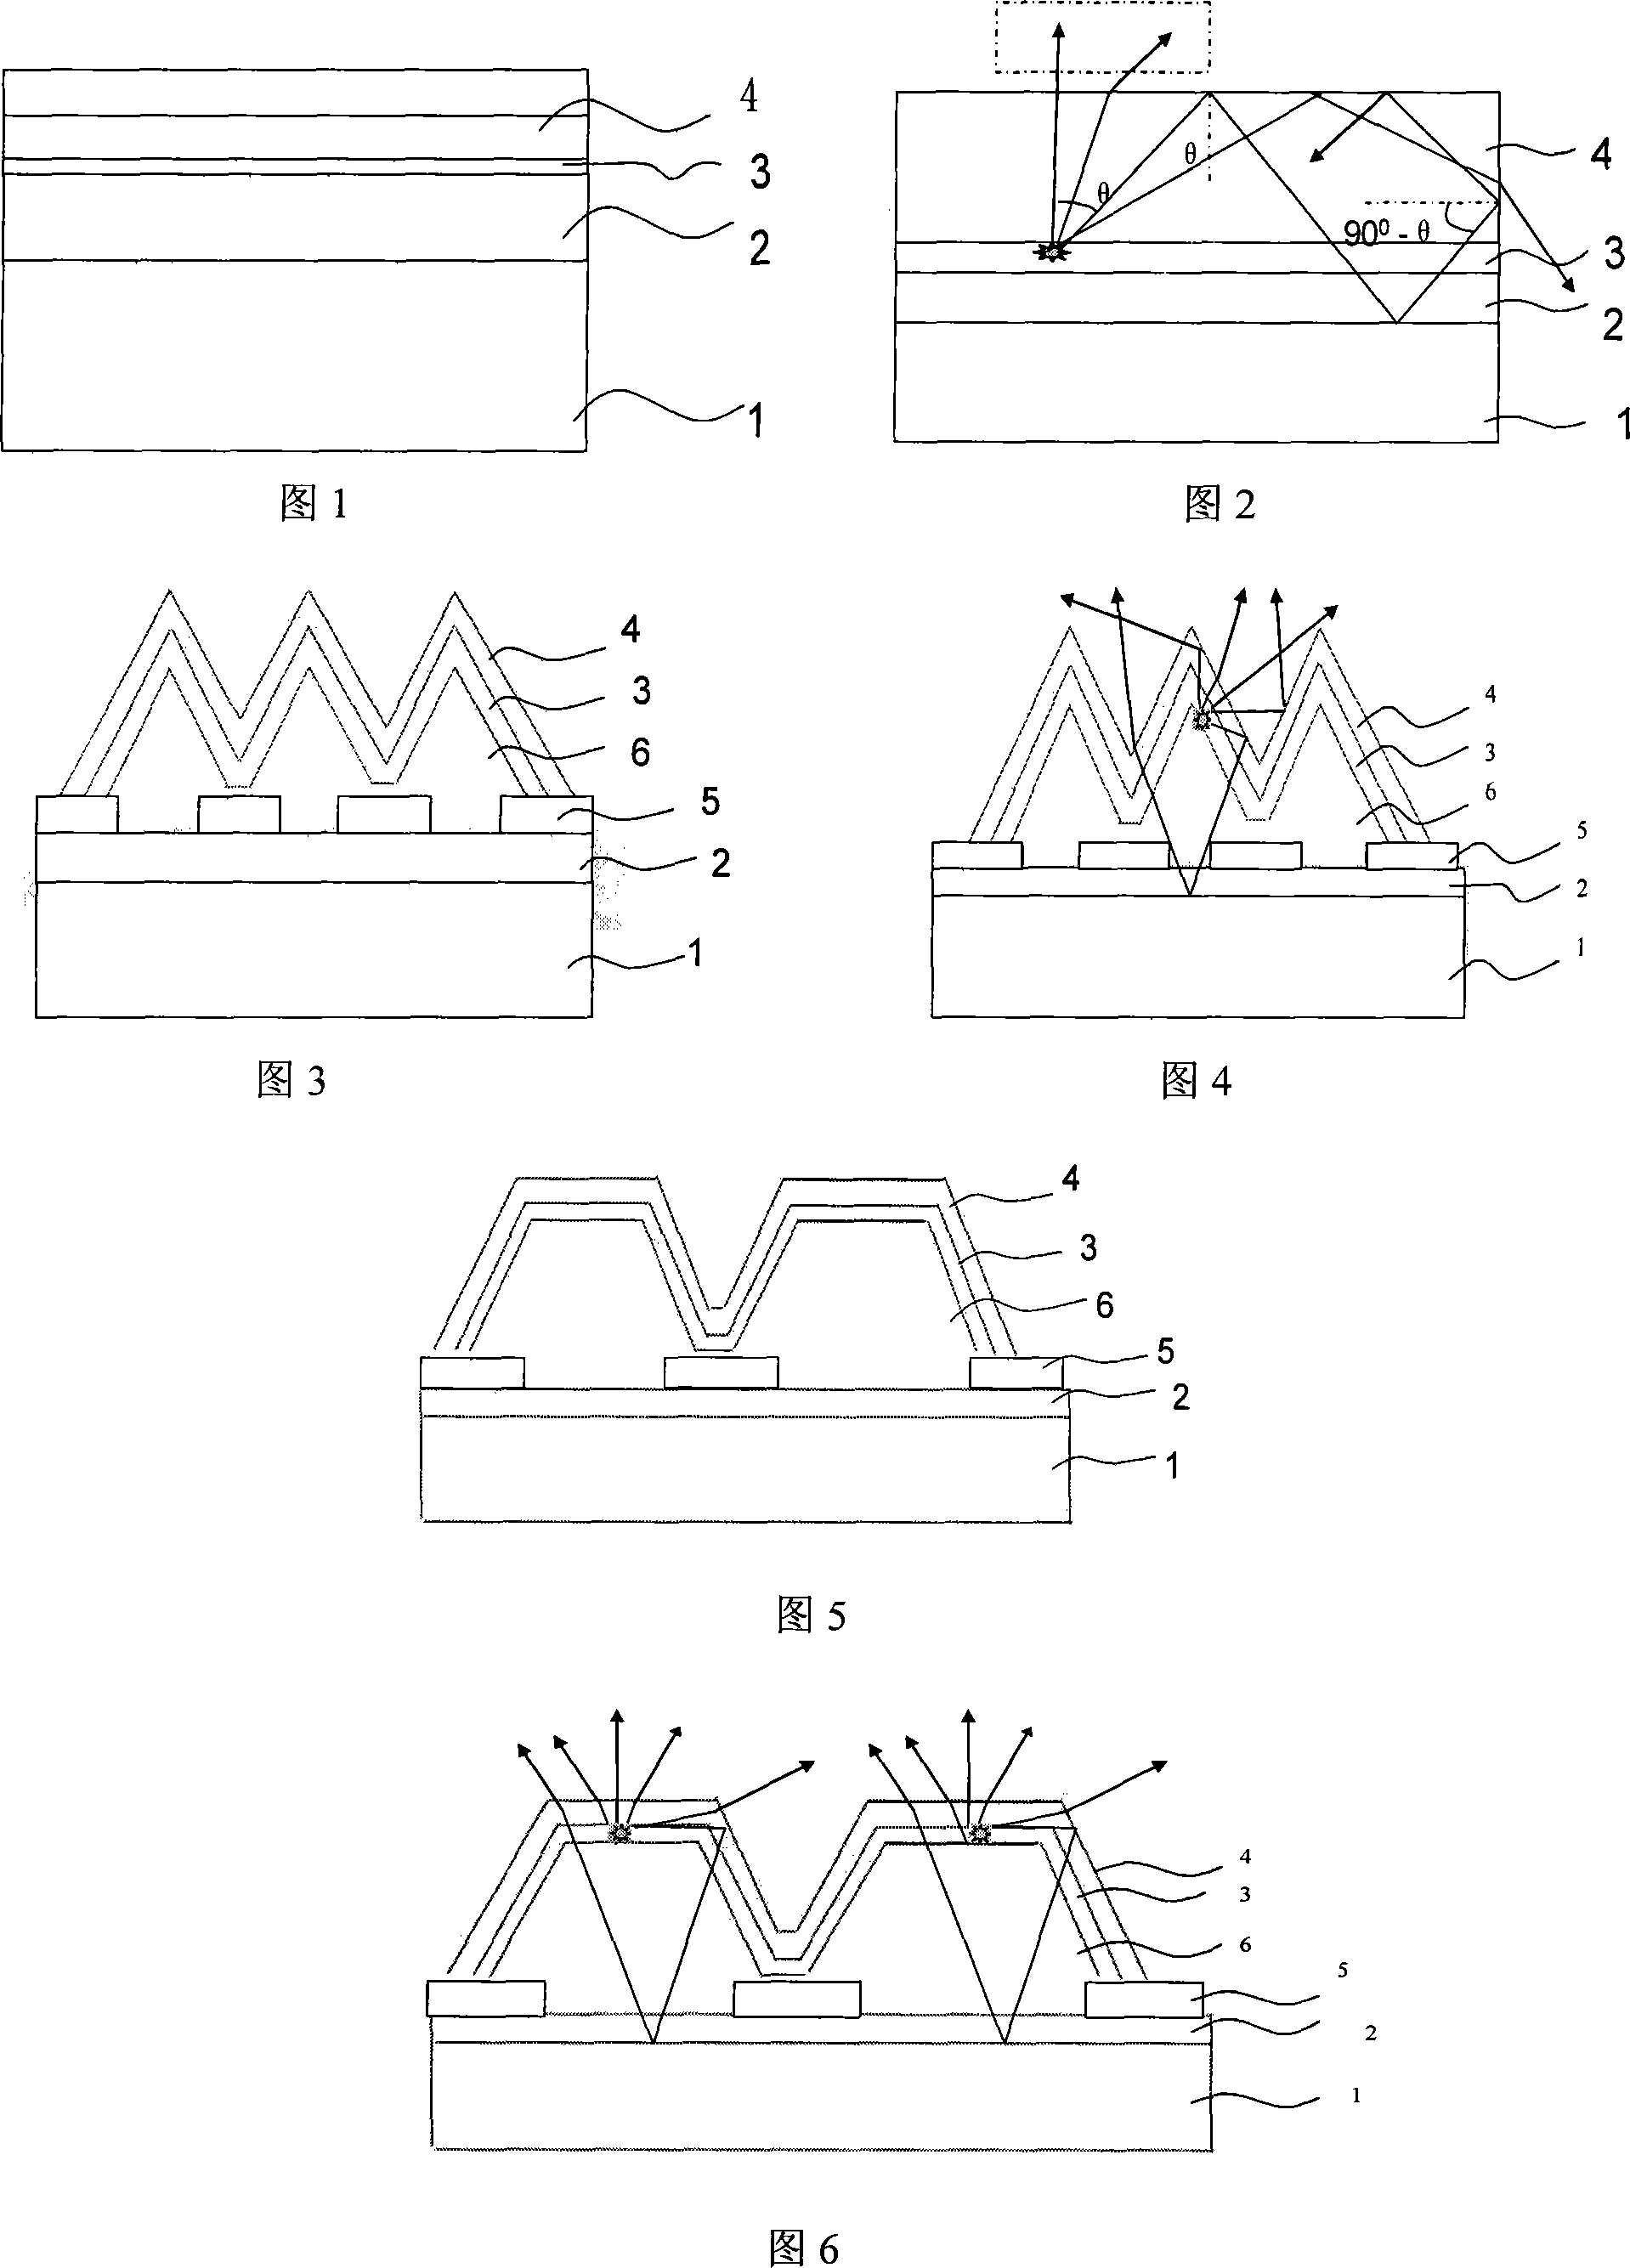 Gallium nitride based LED epitaxial slice structure and method for preparing the same